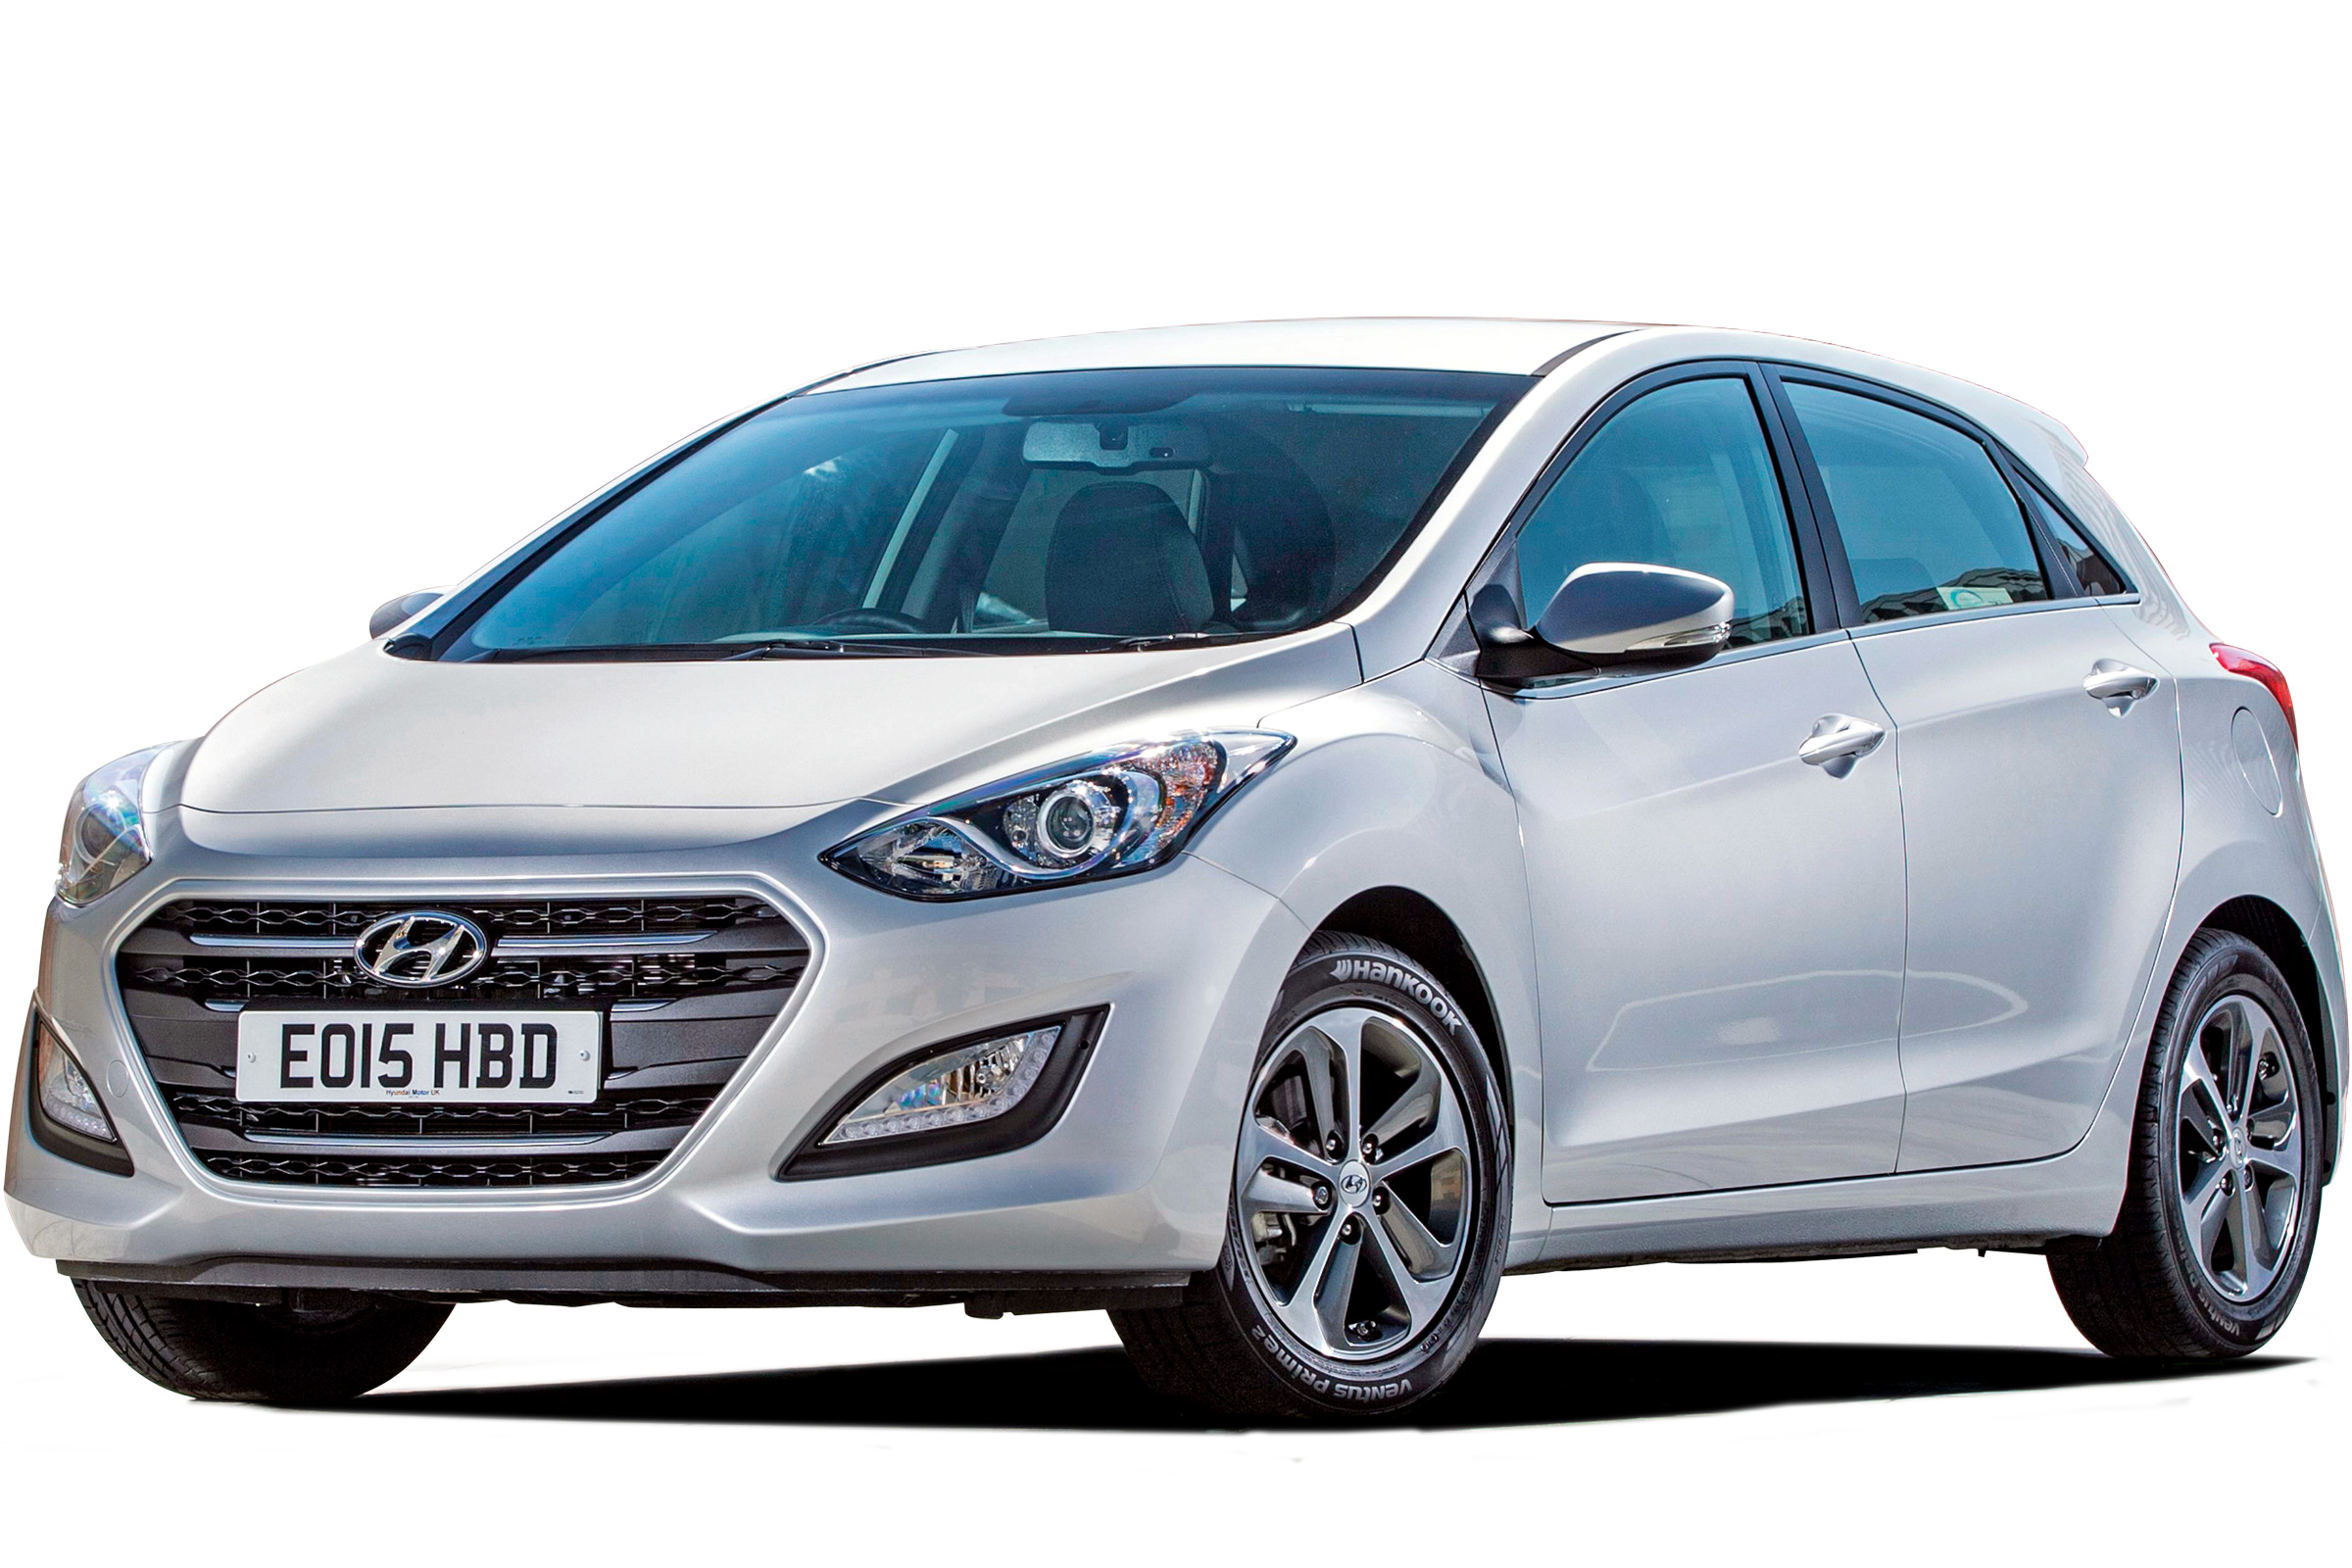 Hyundai I30 Hatchback 11 16 Owner Reviews Mpg Problems Reliability Carbuyer